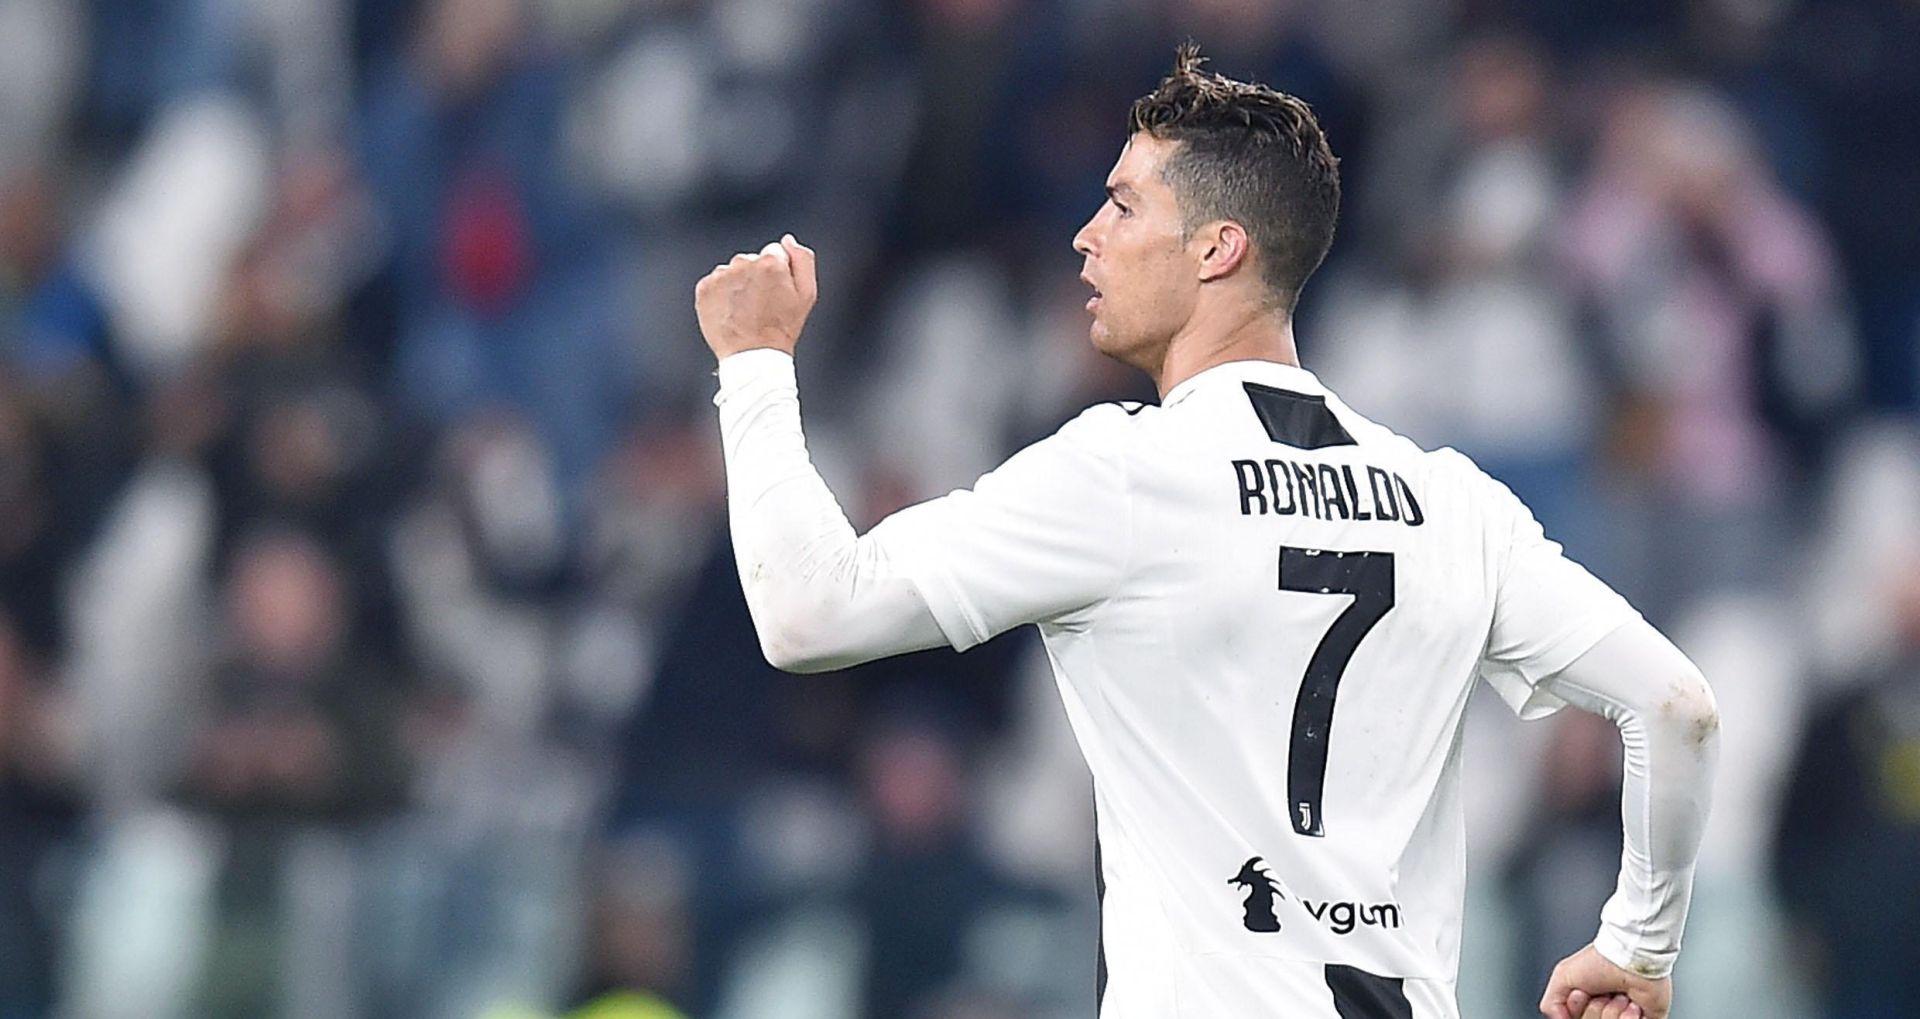 epa07545654 Juventus's Cristiano Ronaldo jubilates after scoring the goal (1-1) during the Italian Serie A soccer match Juventus FC vs Torino FC at the Allianz Stadium in Turin, Italy, 03 May 2019.  EPA/ALESSANDRO DI MARCO